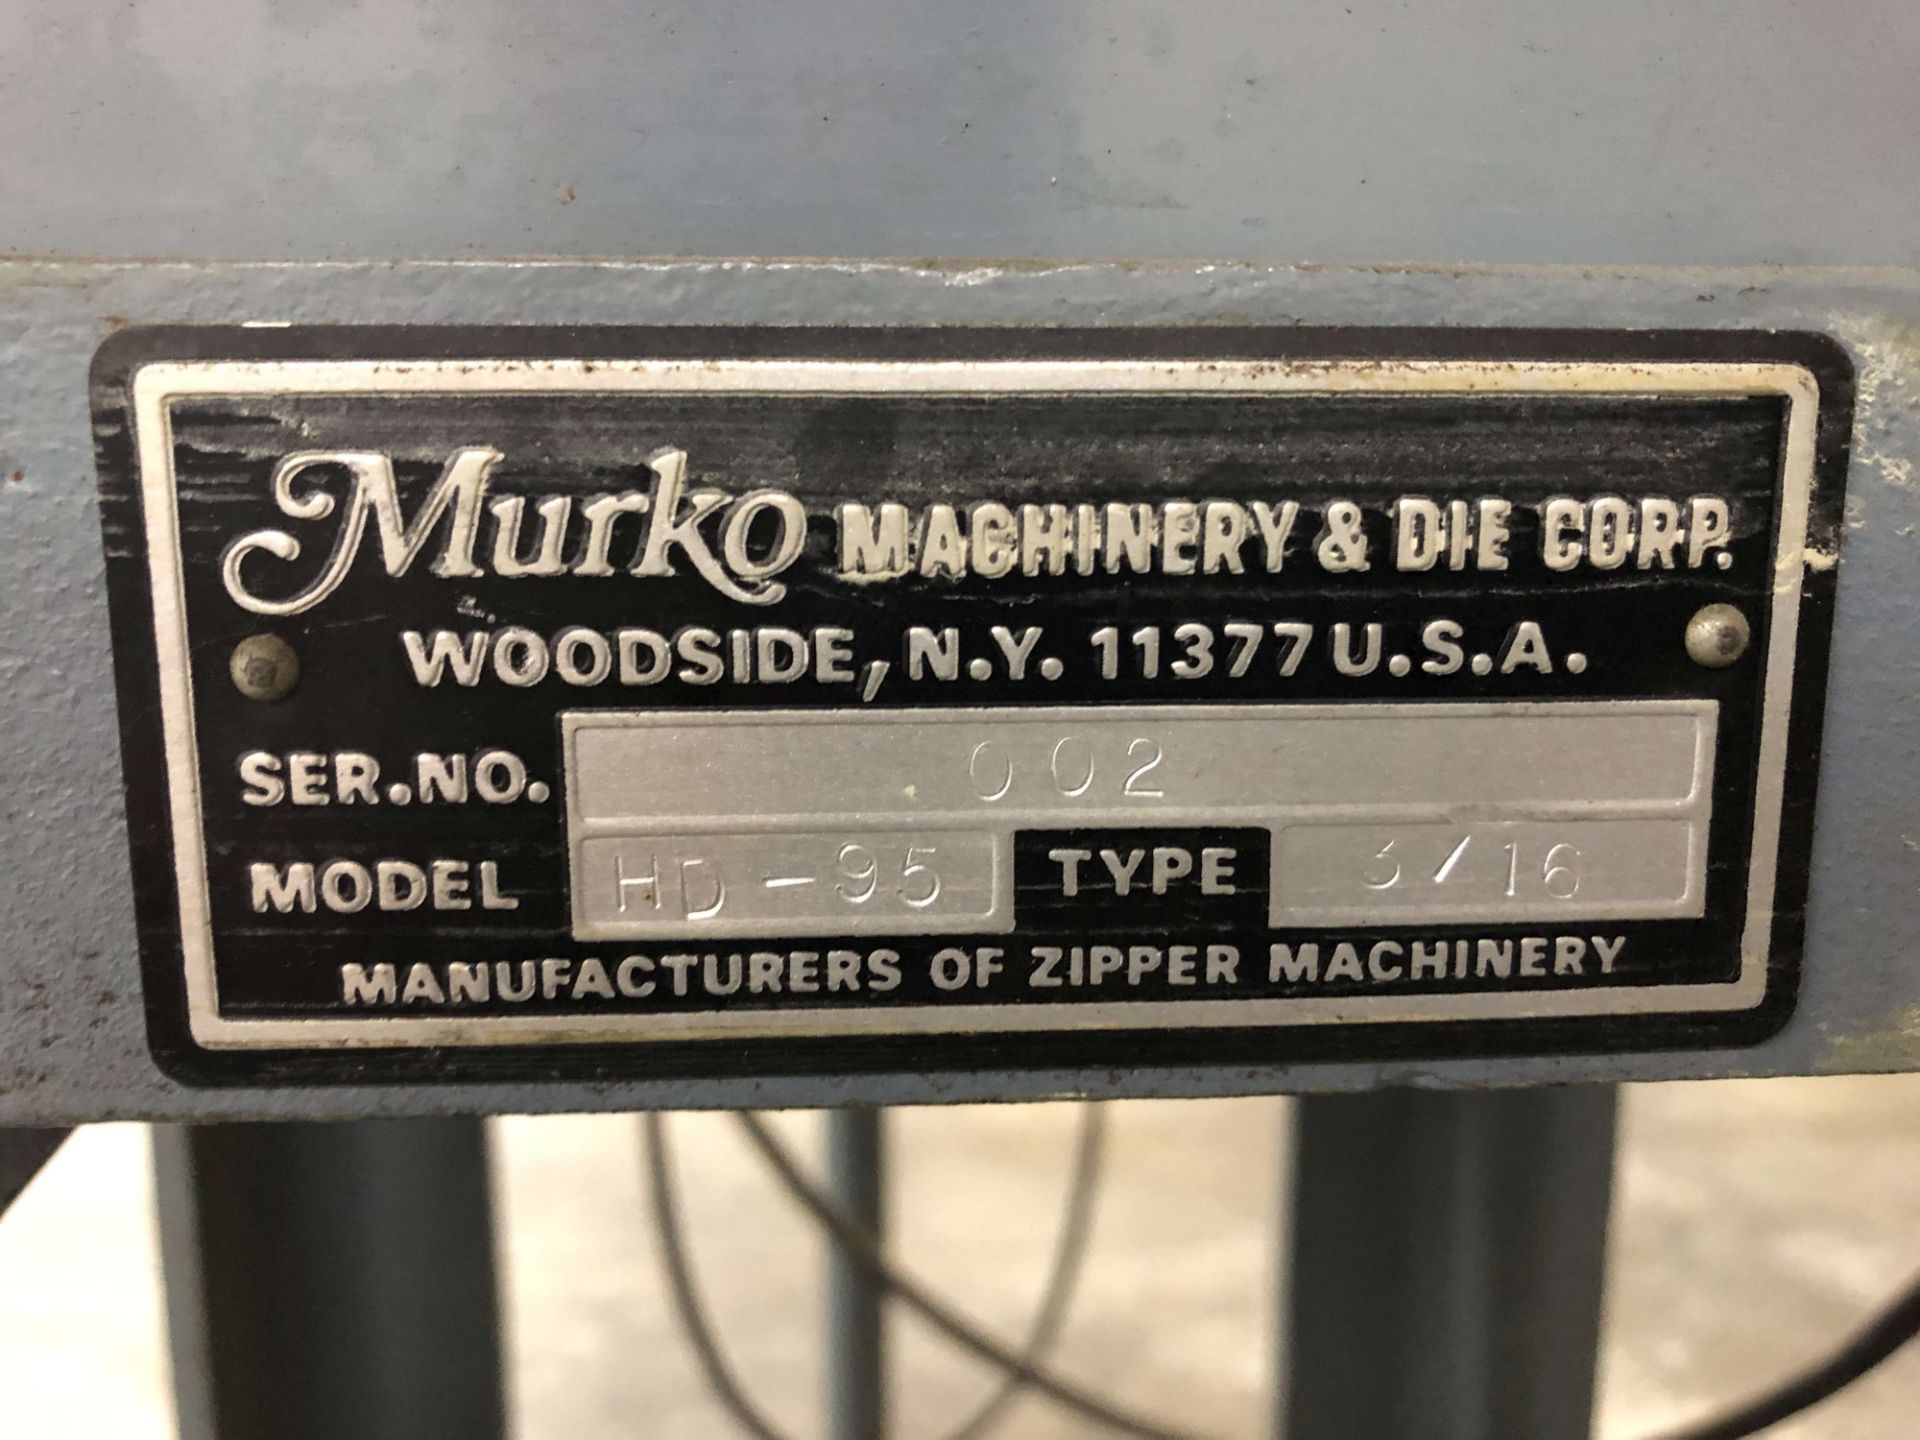 Murko Press, Model HD-95, S/N 002, Baldor Adjustable Speed Drive (Was Being Used For Making Pins) - Image 5 of 5